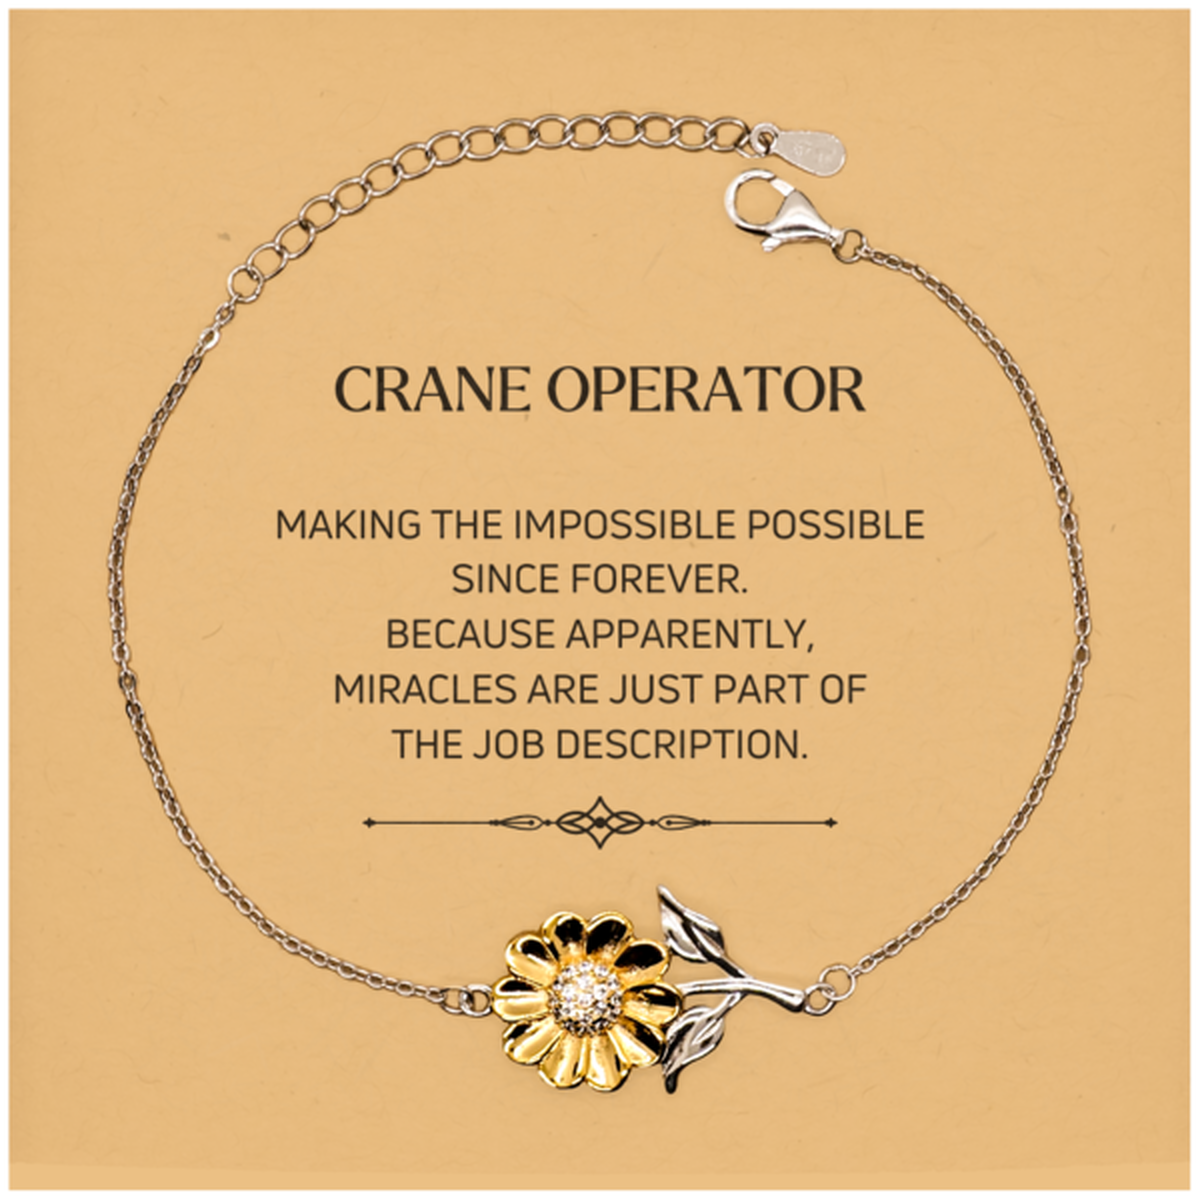 Funny Crane Operator Gifts, Miracles are just part of the job description, Inspirational Birthday Christmas Sunflower Bracelet For Crane Operator, Men, Women, Coworkers, Friends, Boss